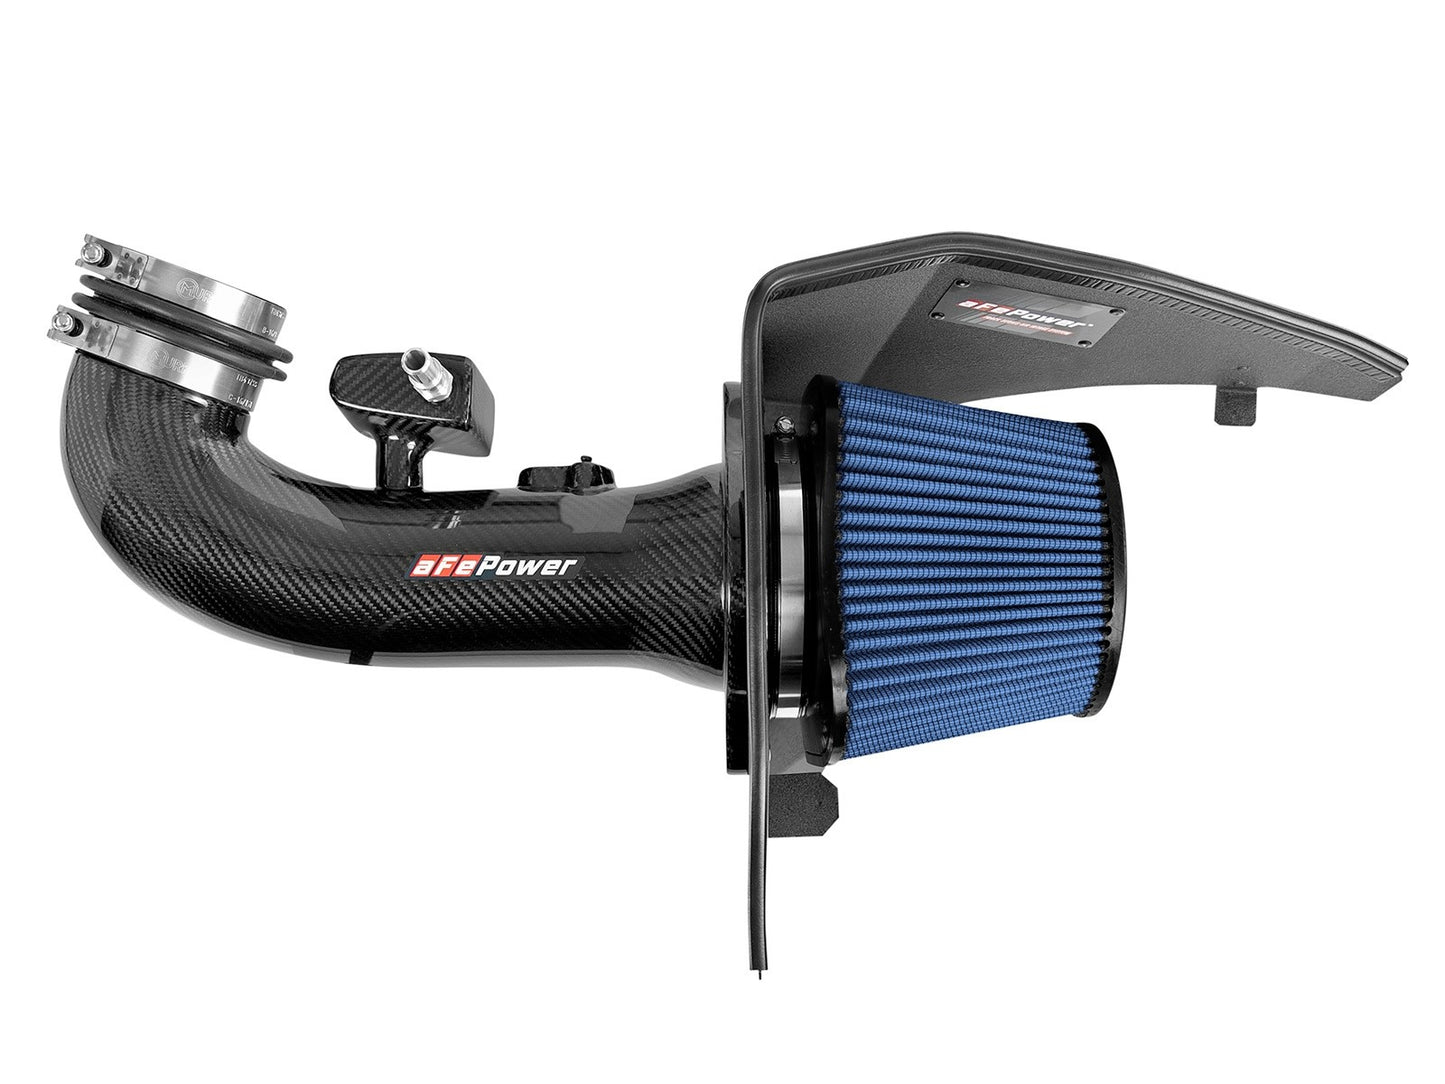 Track Series Carbon Fiber Cold Air Intake System w/Pro 5R Filter